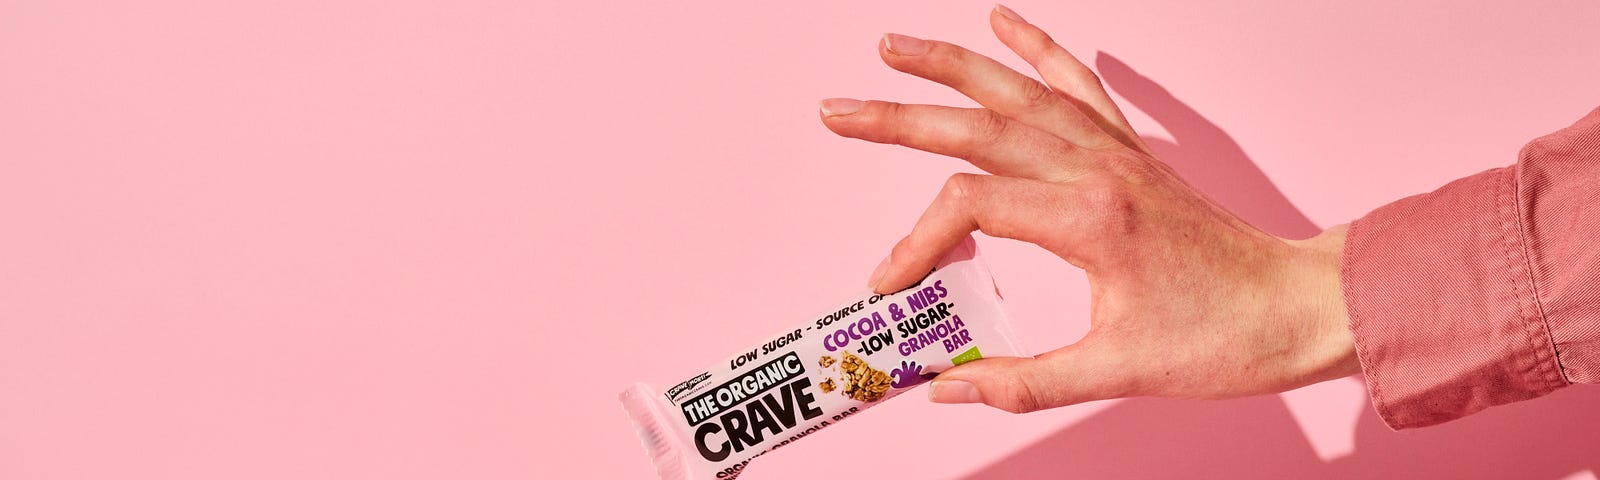 A hand emerges from the right to hold a protein bar (unopened) with his/her thumb and index finger. Pink background.